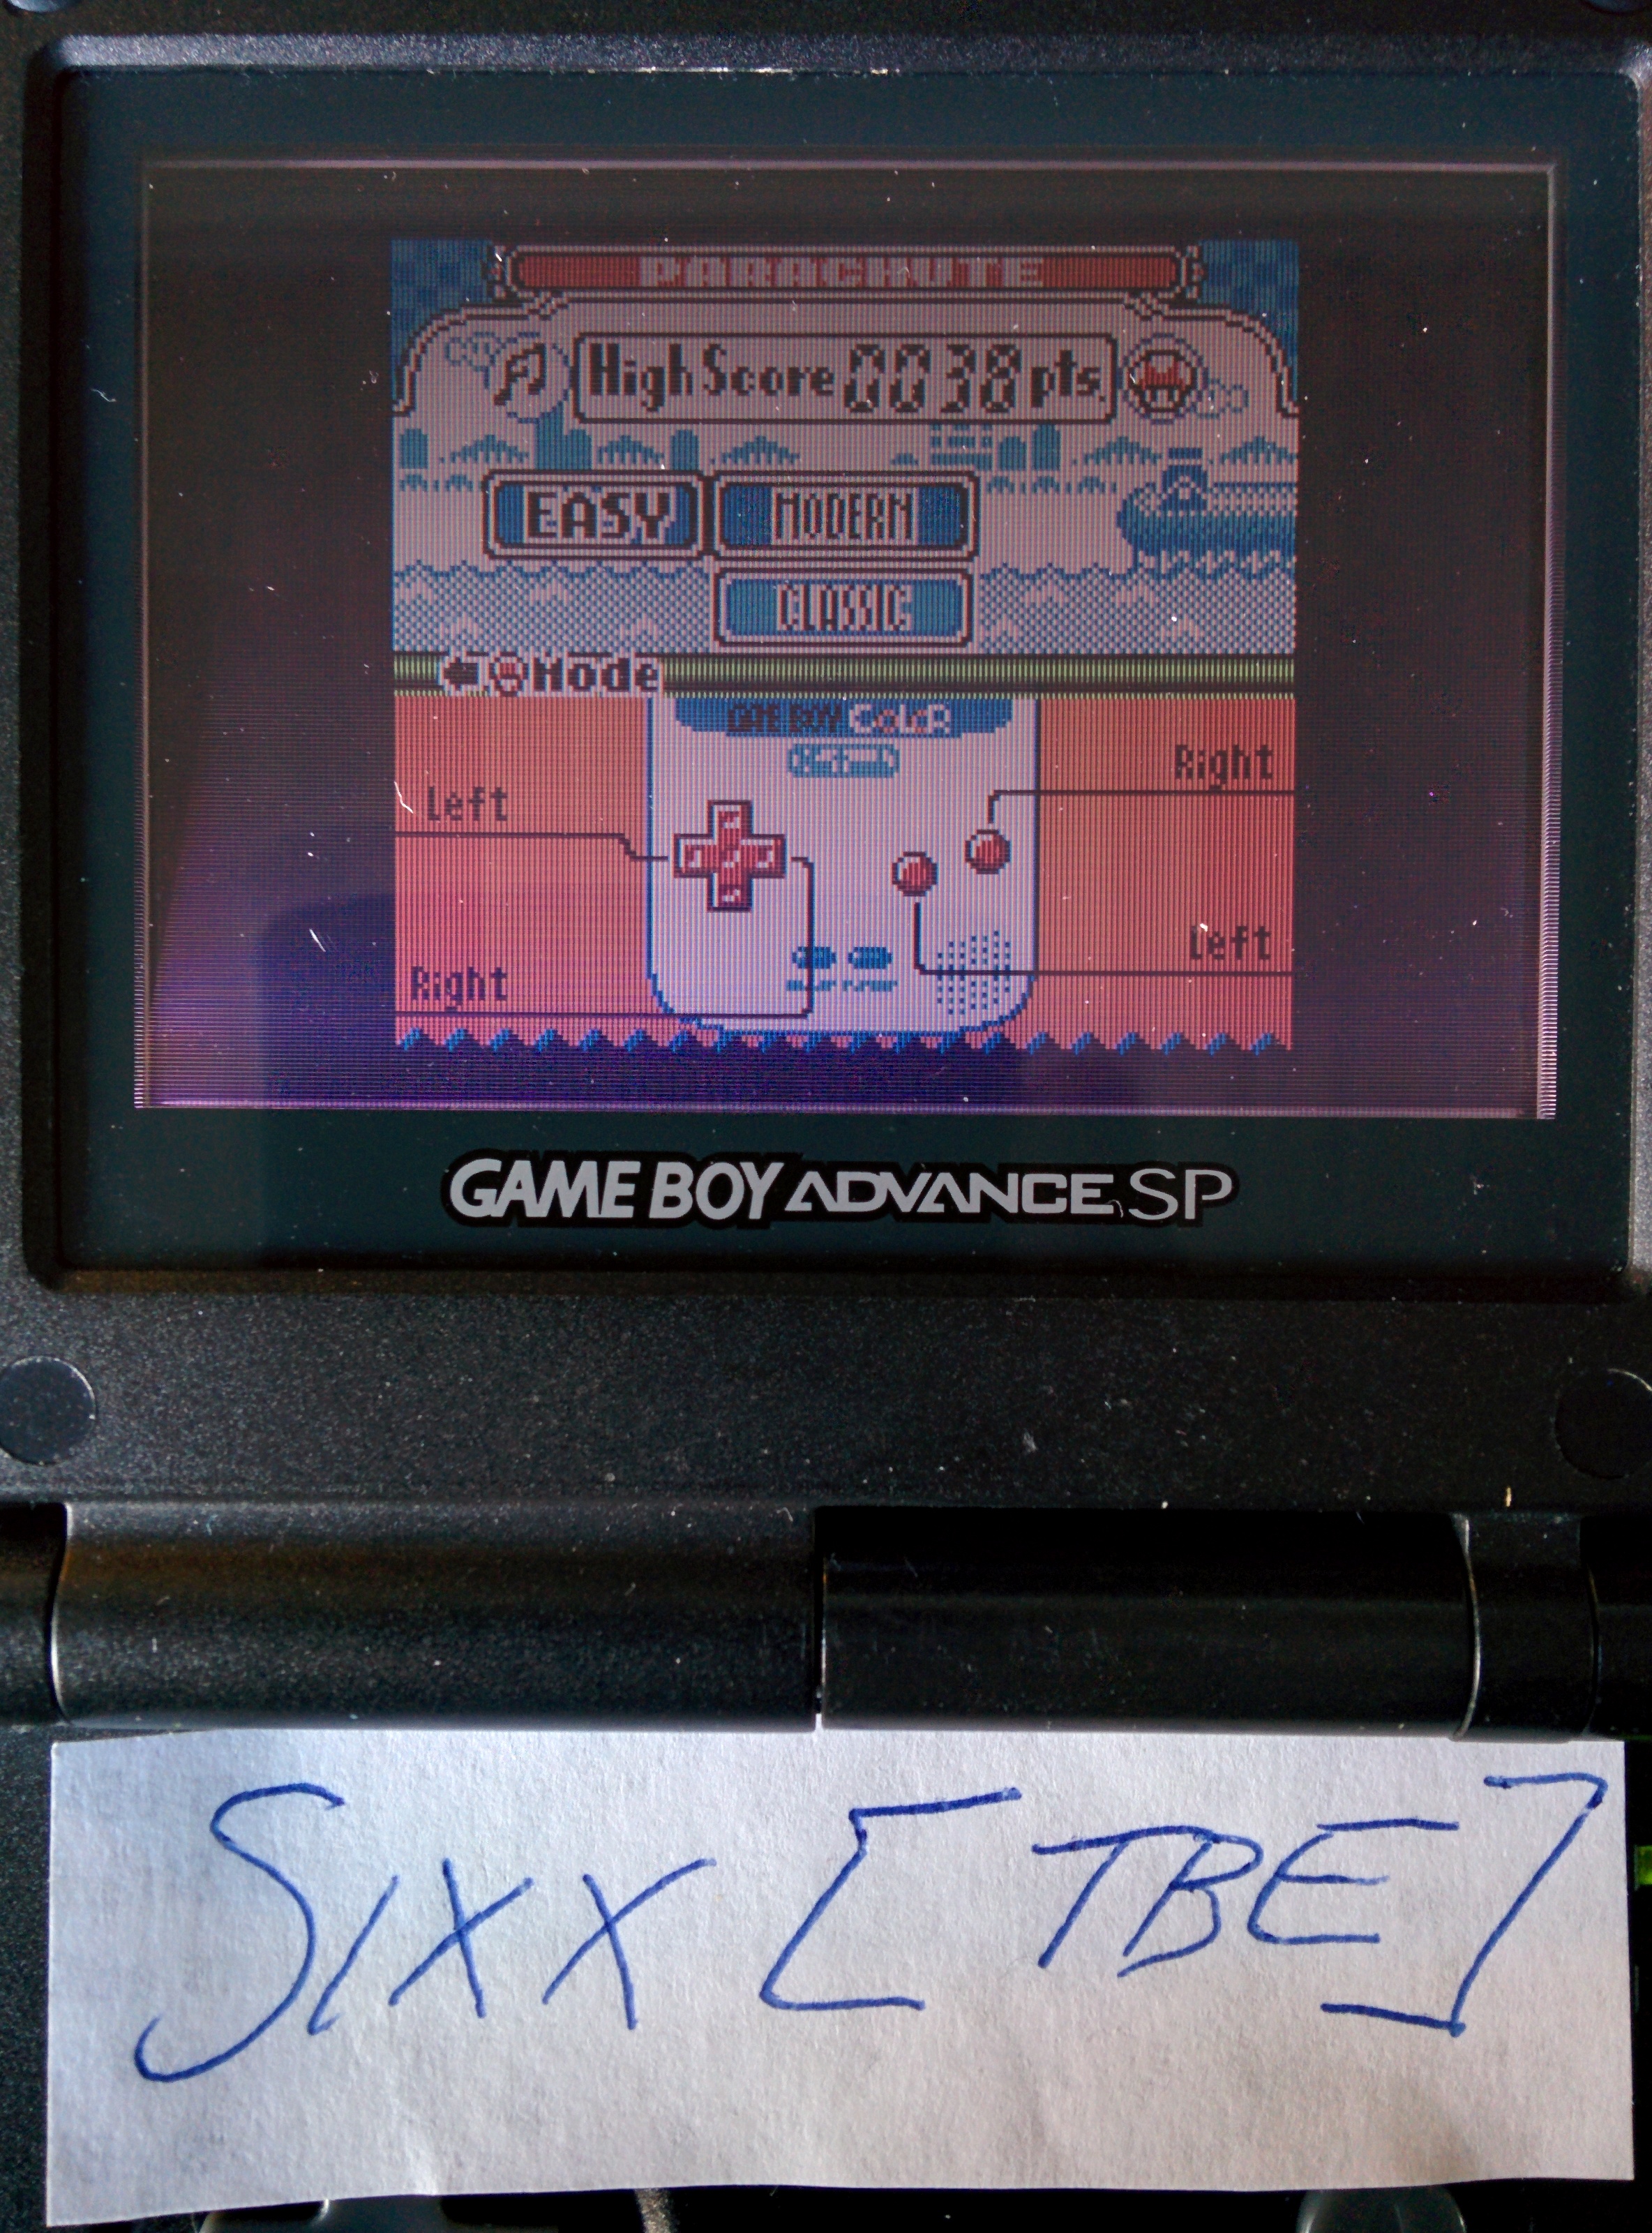 Sixx: Game & Watch Gallery 2: Parachute: Modern: Easy (Game Boy Color) 38 points on 2014-08-24 10:48:24